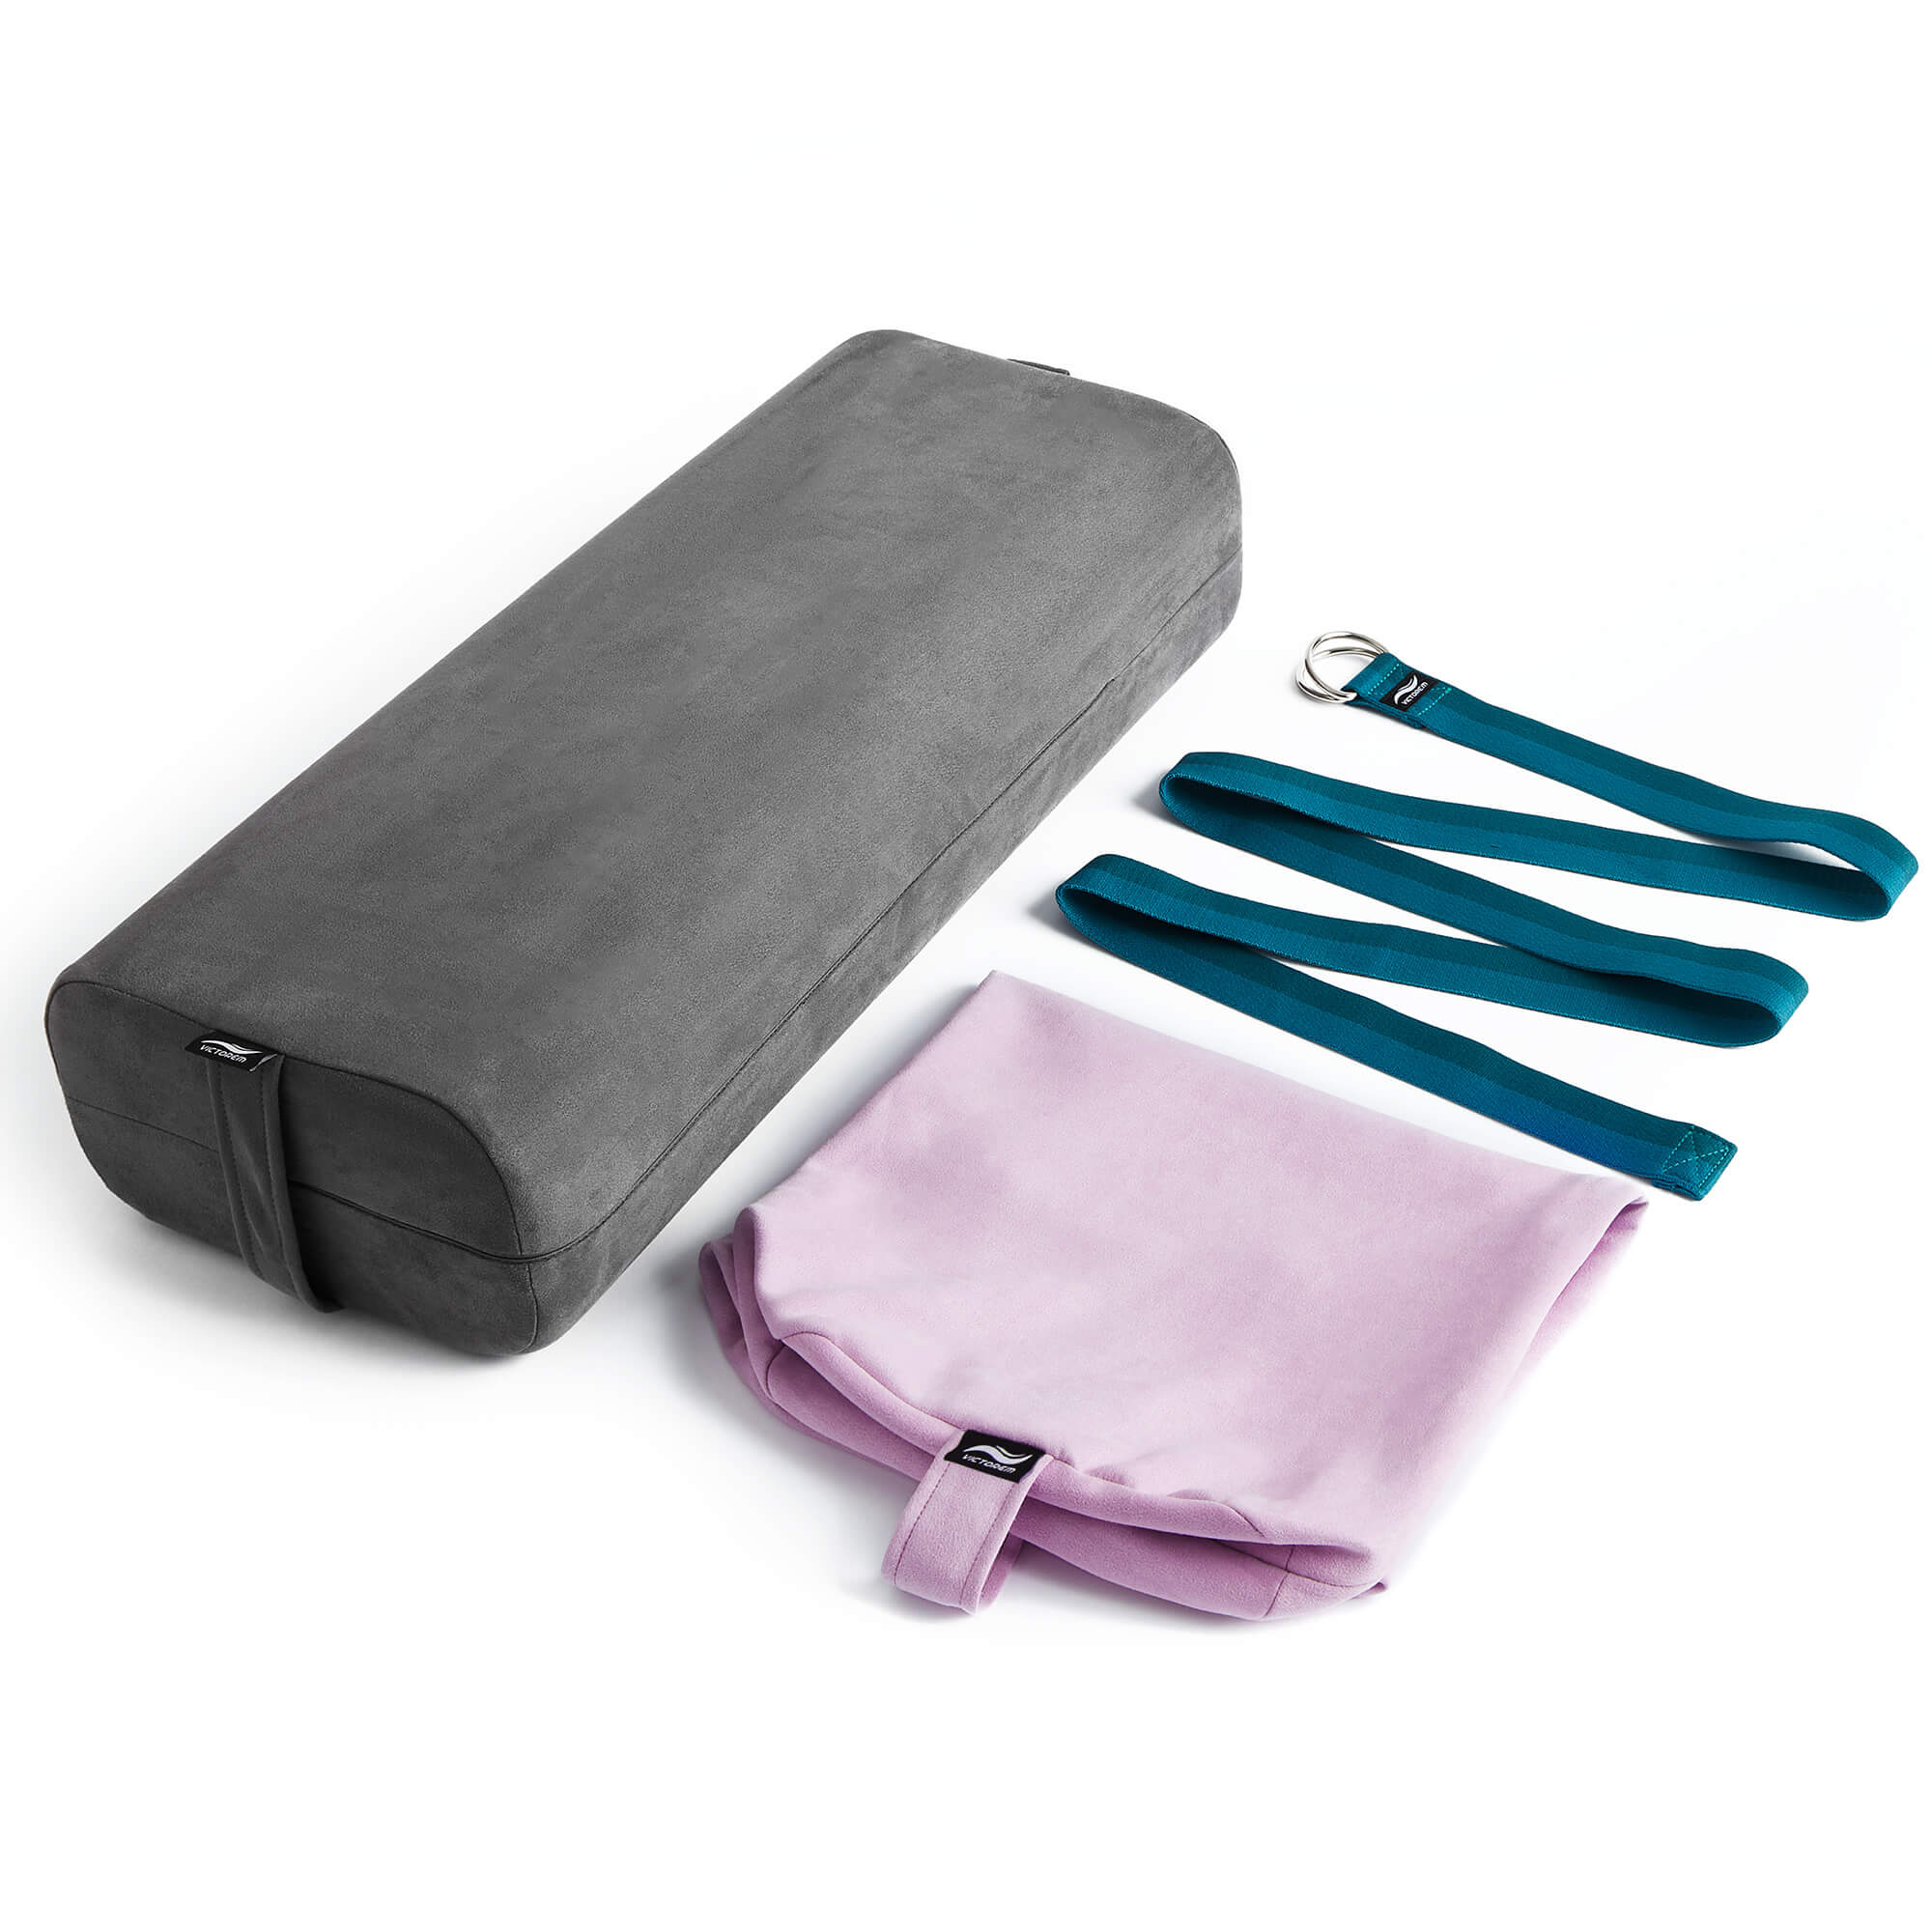 Yoga Bolster: Firm Support to Help Your Muscles Open - Victorem Gear